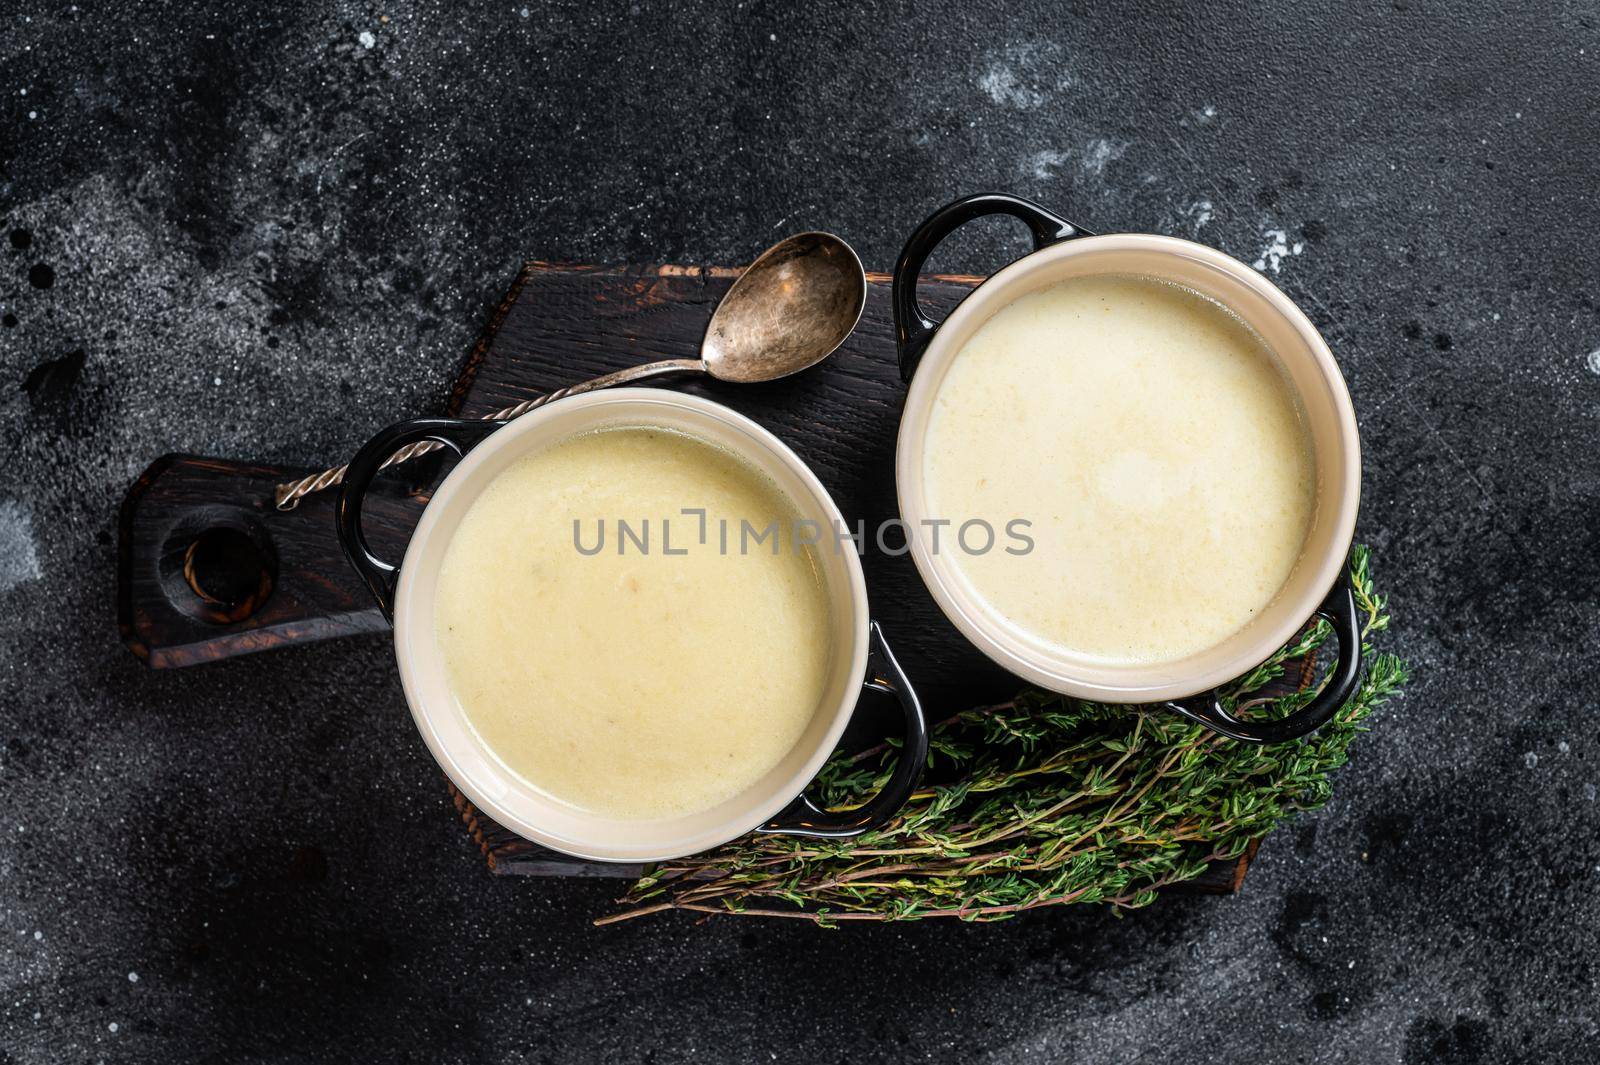 Potato cream soup in bowls on kitchen table. Black background. Top view by Composter